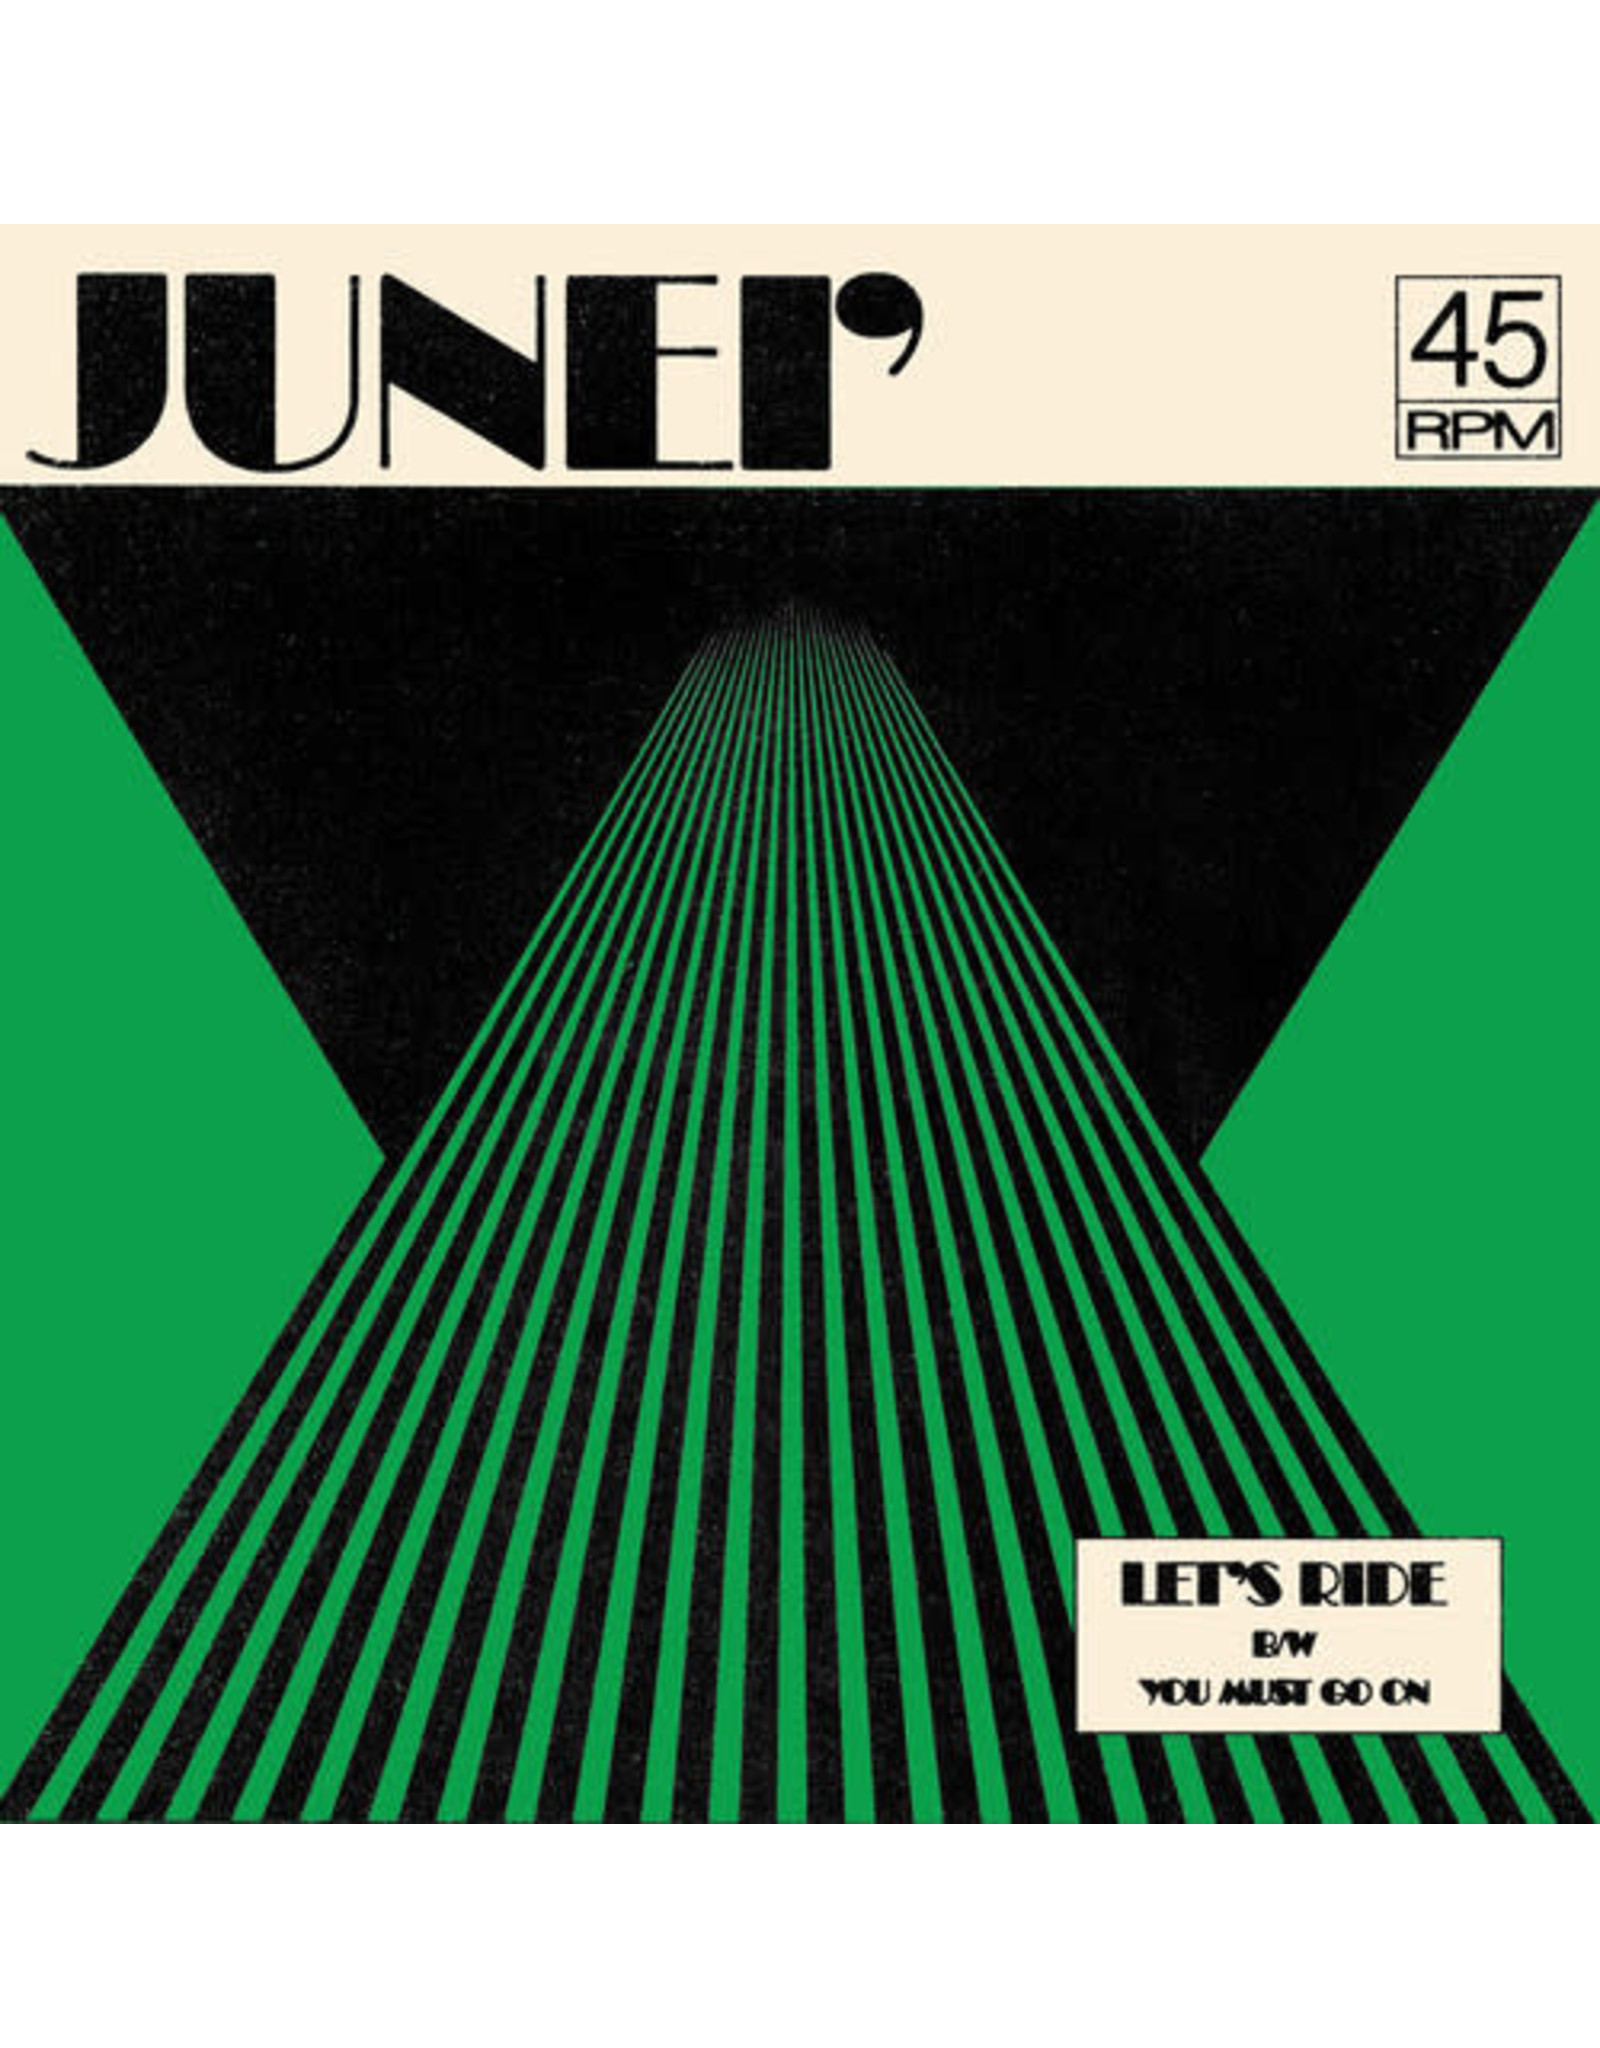 New Vinyl JUNEI' - Let's Ride B/ w You Must Go On 7"